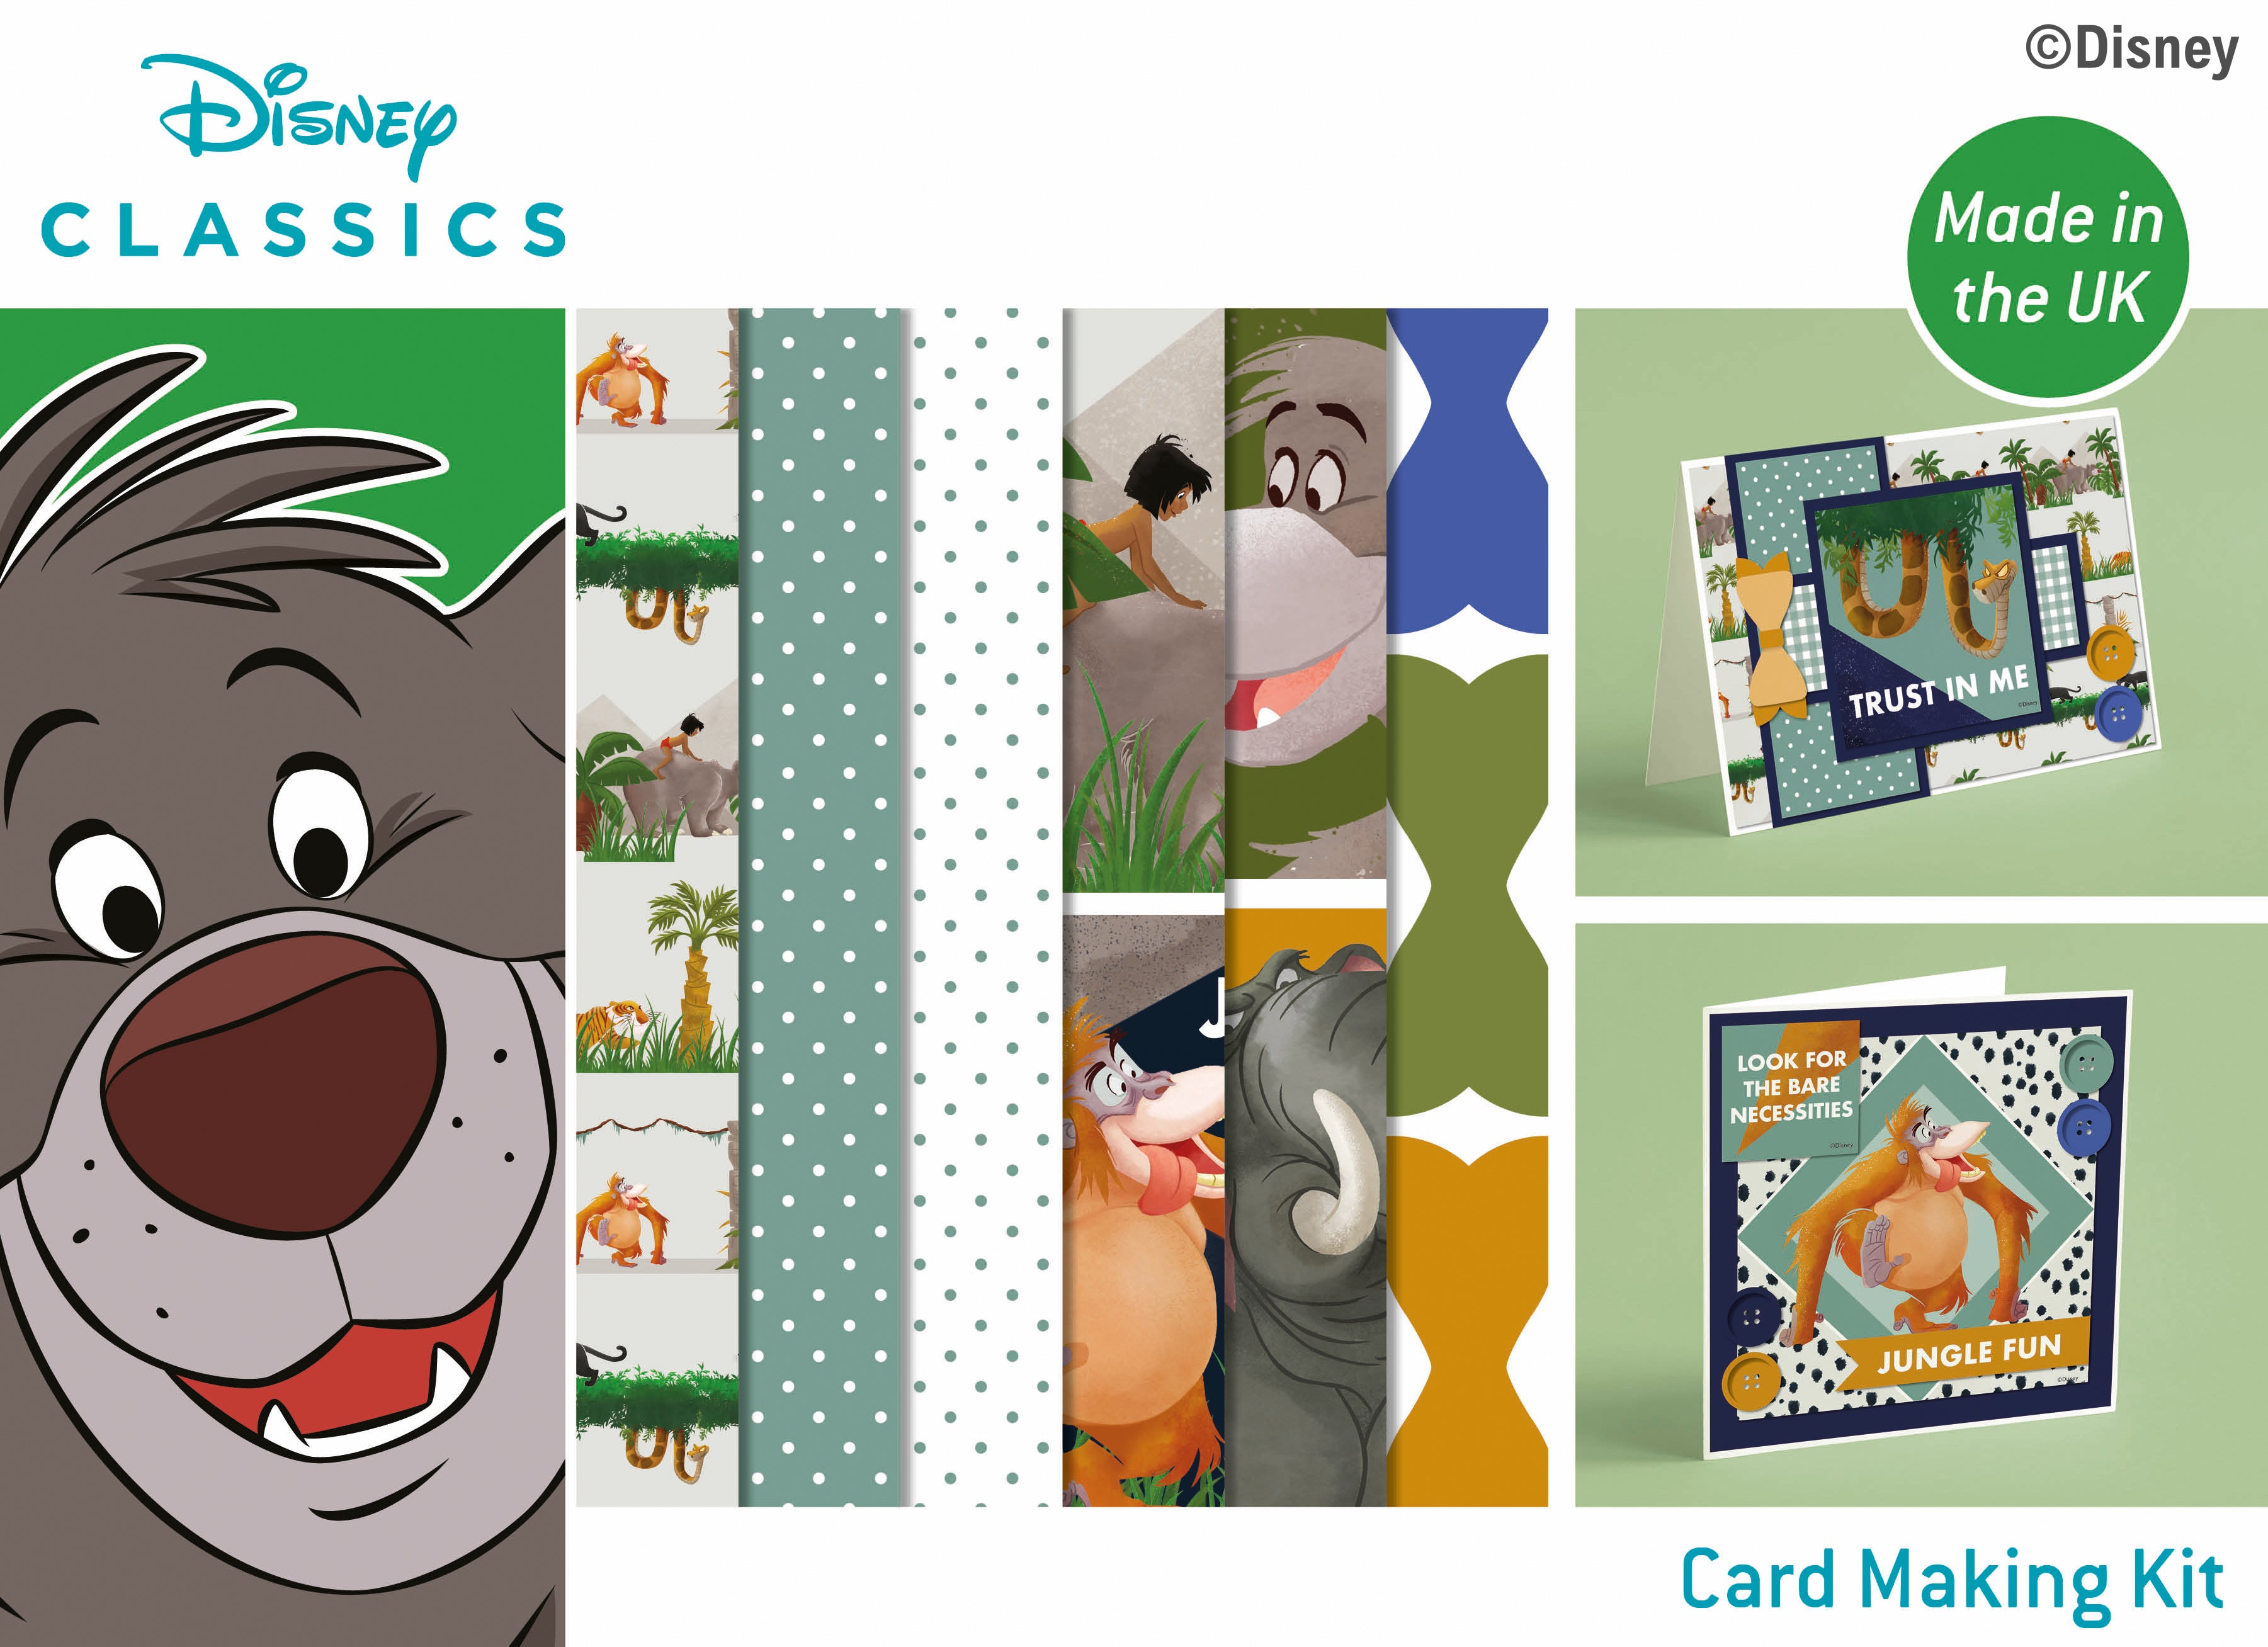 The Jungle Book - Large Card A4 Kit